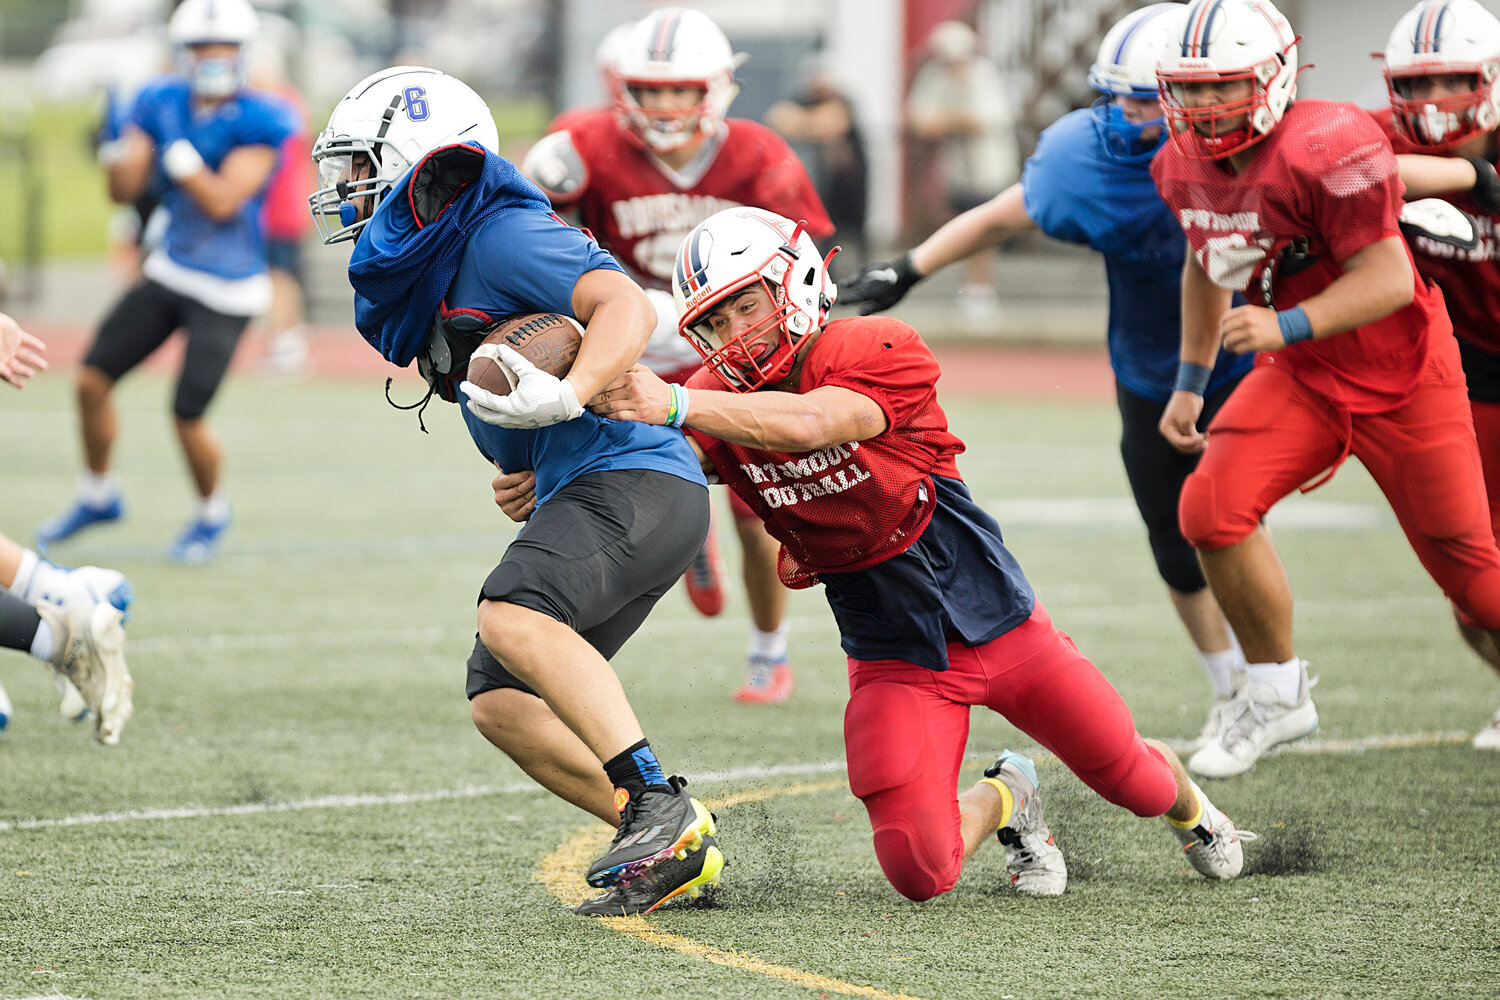 Portsmouth High’s Aidan Maisen stops a Middletown running back from advancing the ball during a scrimmage at PHS on Saturday. The Patriots start their season on Friday, Sept. 8.